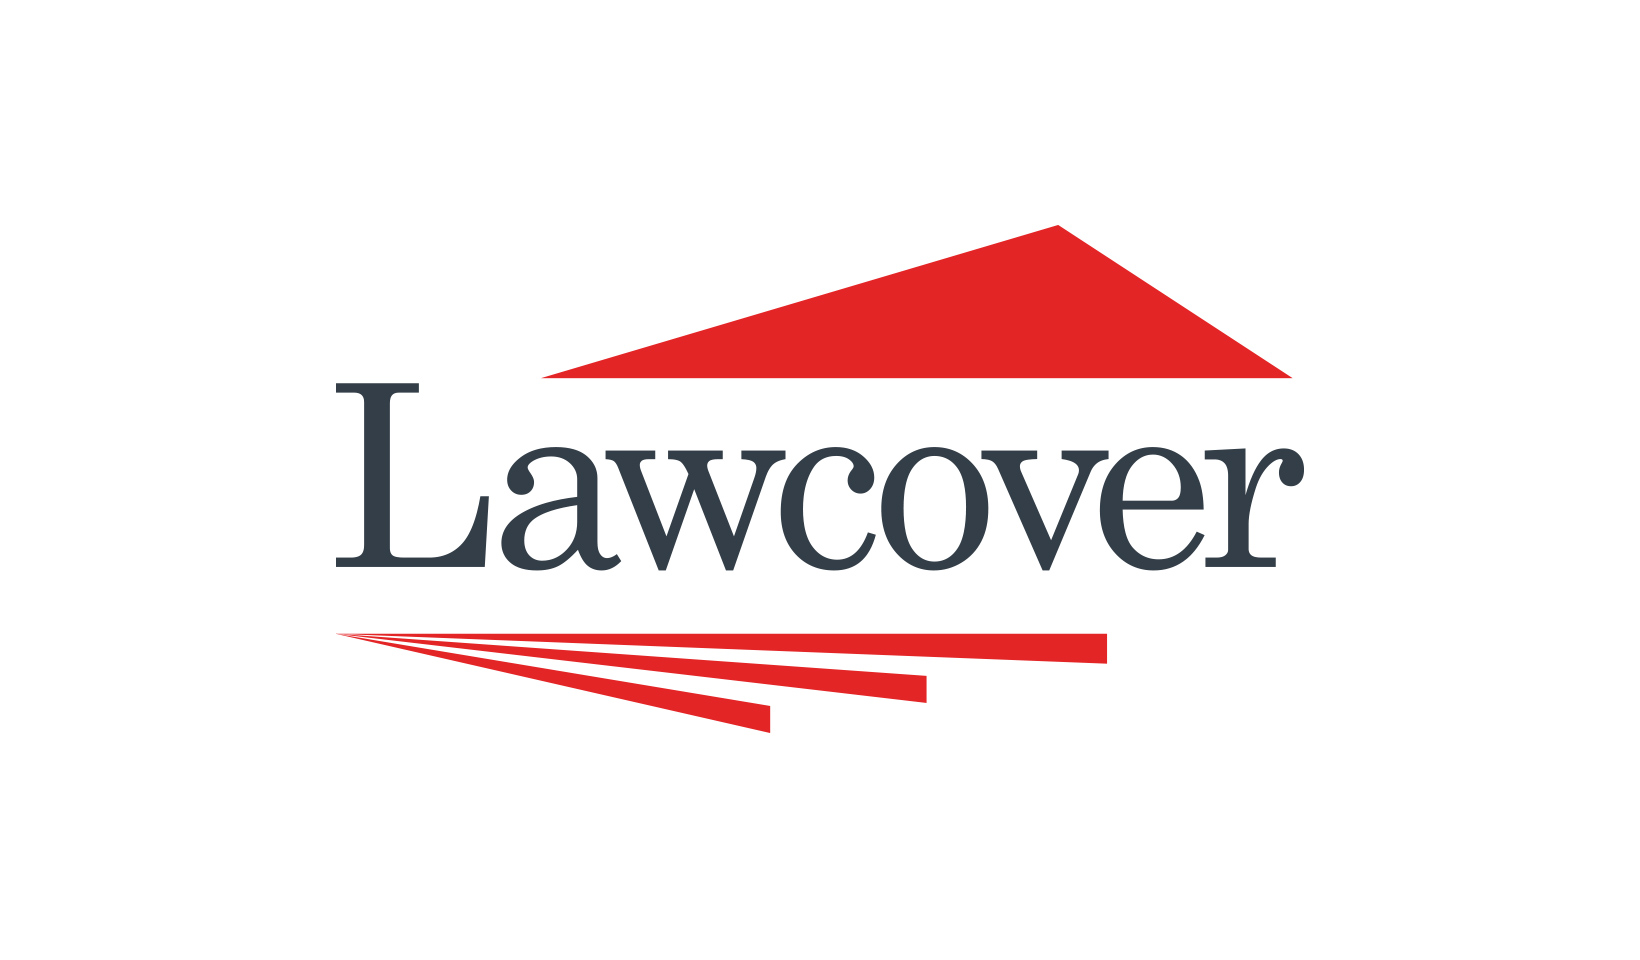 Lawcover-logo-design-by think creative agency